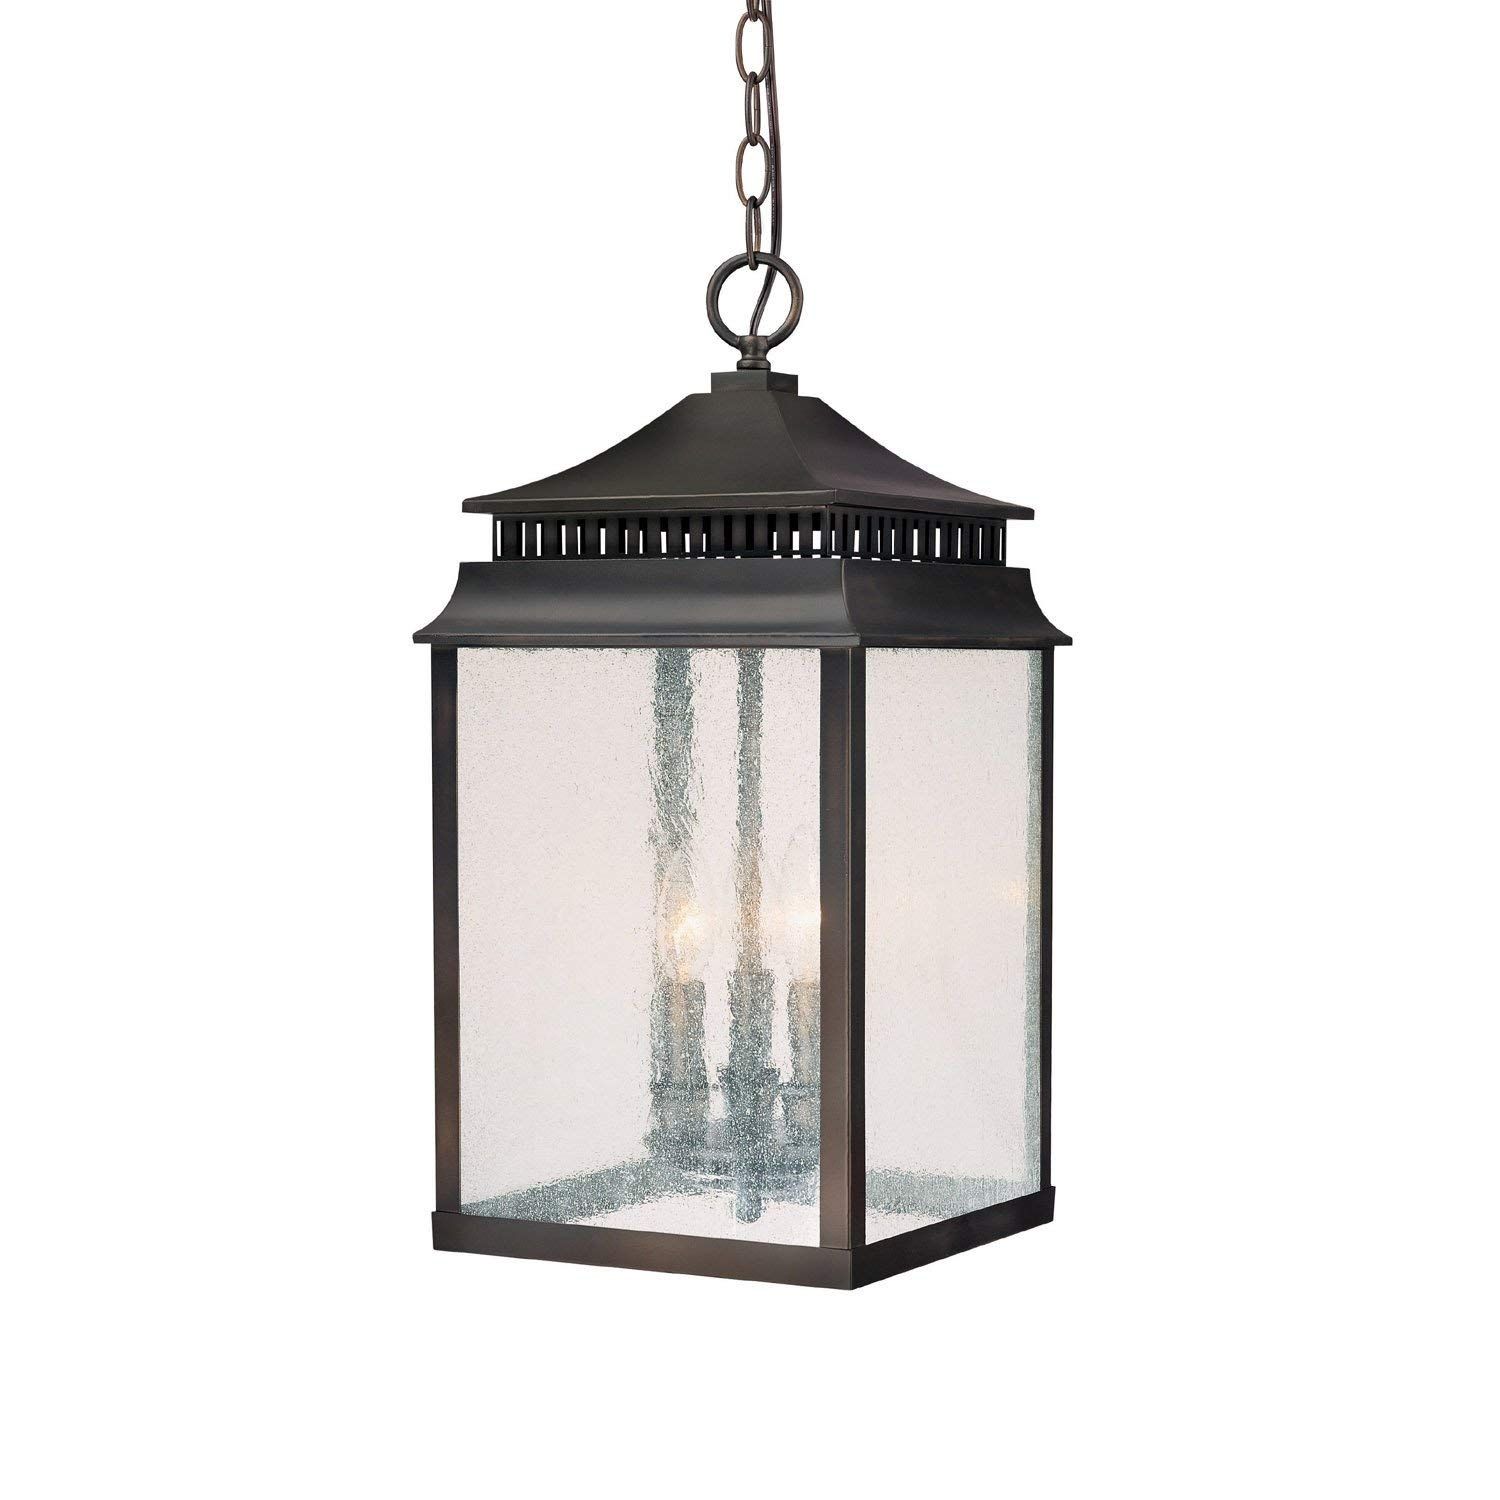 Capital Lighting 9116ob Sutter Creek 3 Light Exterior Hanging Intended For Outdoor Lanterns At Amazon (Photo 12 of 20)